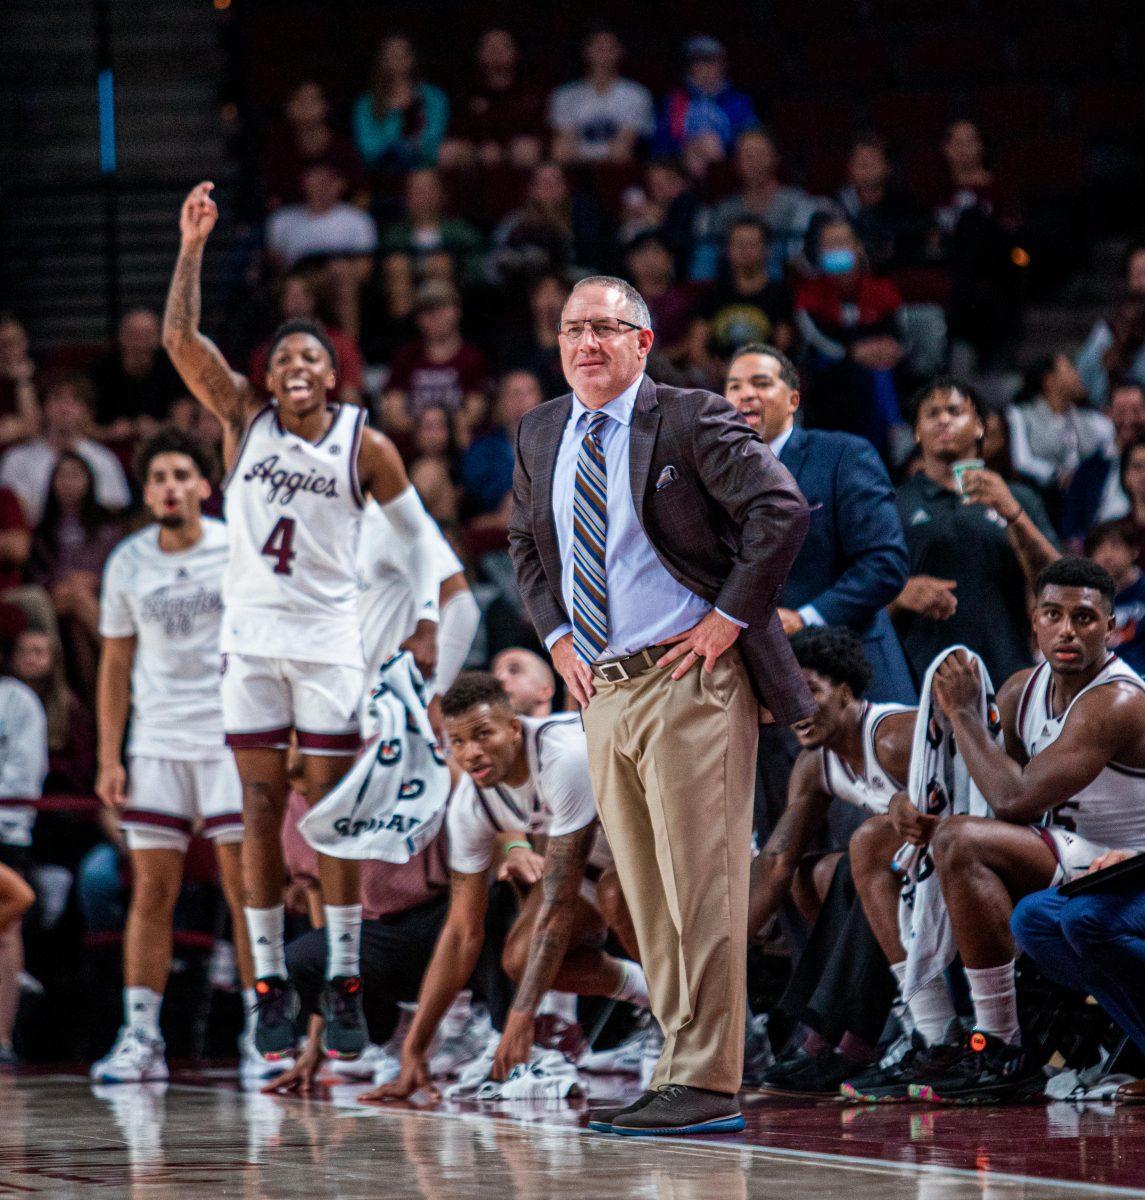 Head+coach+Buzz+Williams+smiles+as+the+team+shoots+a+3-pointer+during+a+game+against+A%26amp%3BM+Kingsville+at+Reed+Arena+on+Friday%2C+Nov.+4%2C+2022.